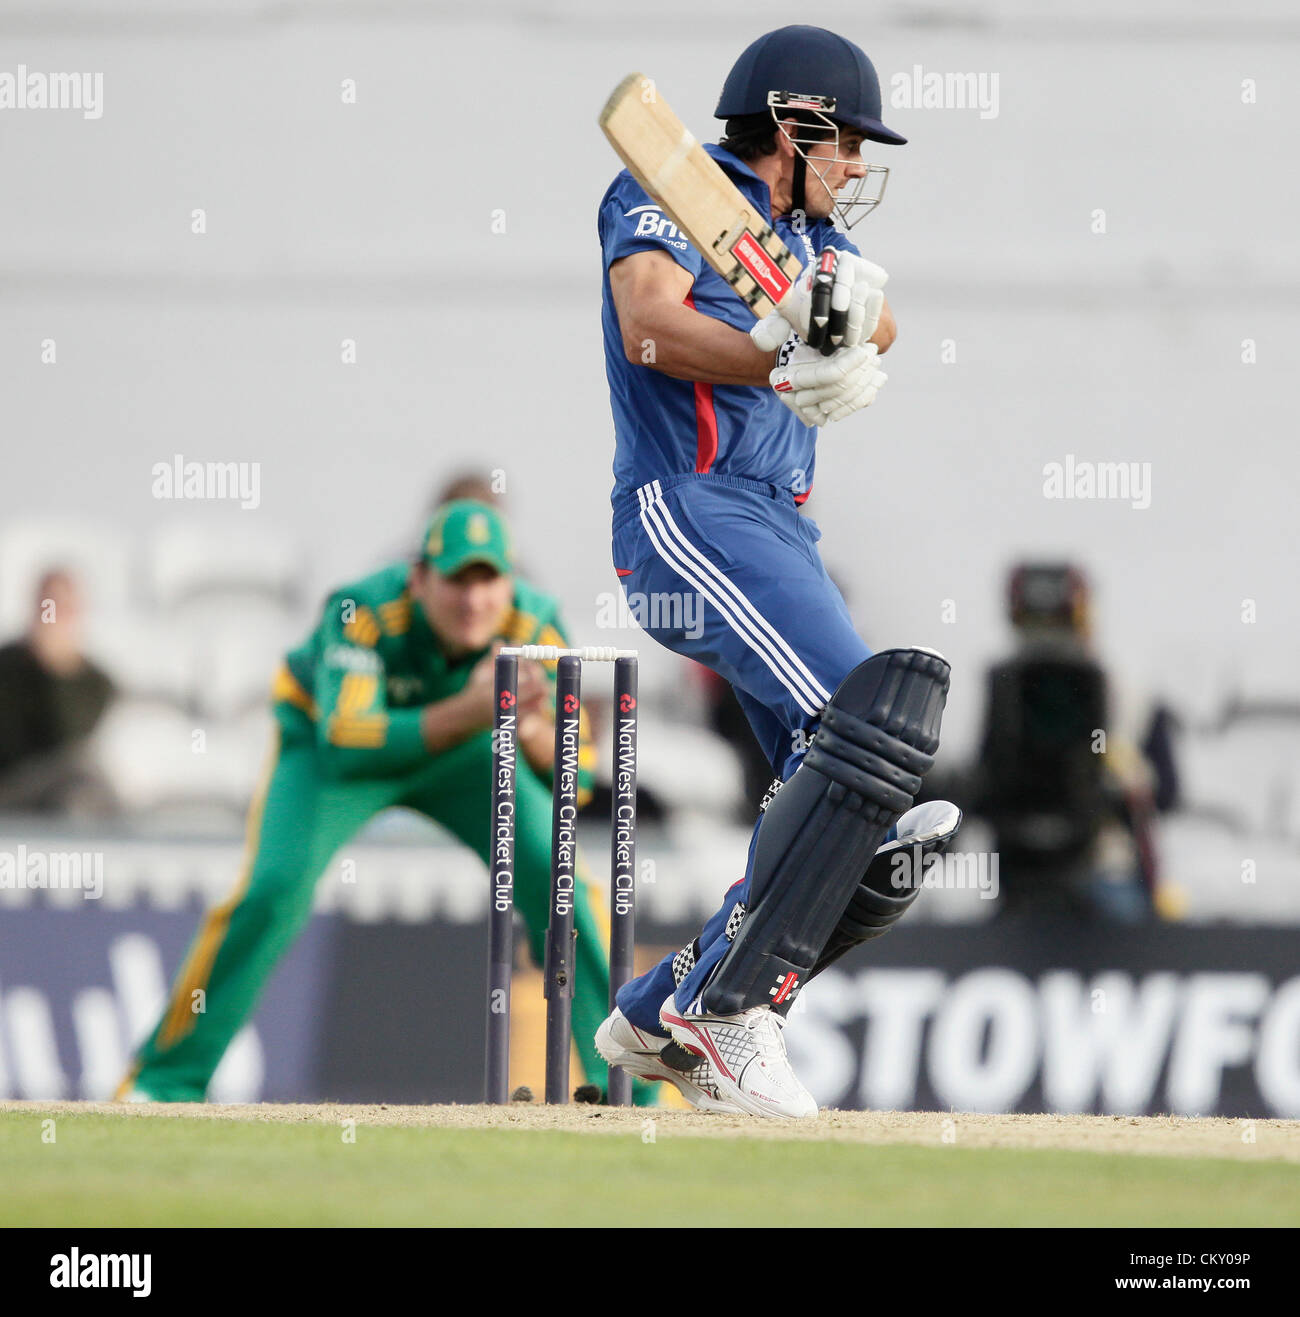 31.08.2012. London England Alistair Cook the Engalnd captain in batting action during the England v South Africa: 3rd Natwest ODI at The Kia Oval Cricket Ground Kennington London England. Stock Photo